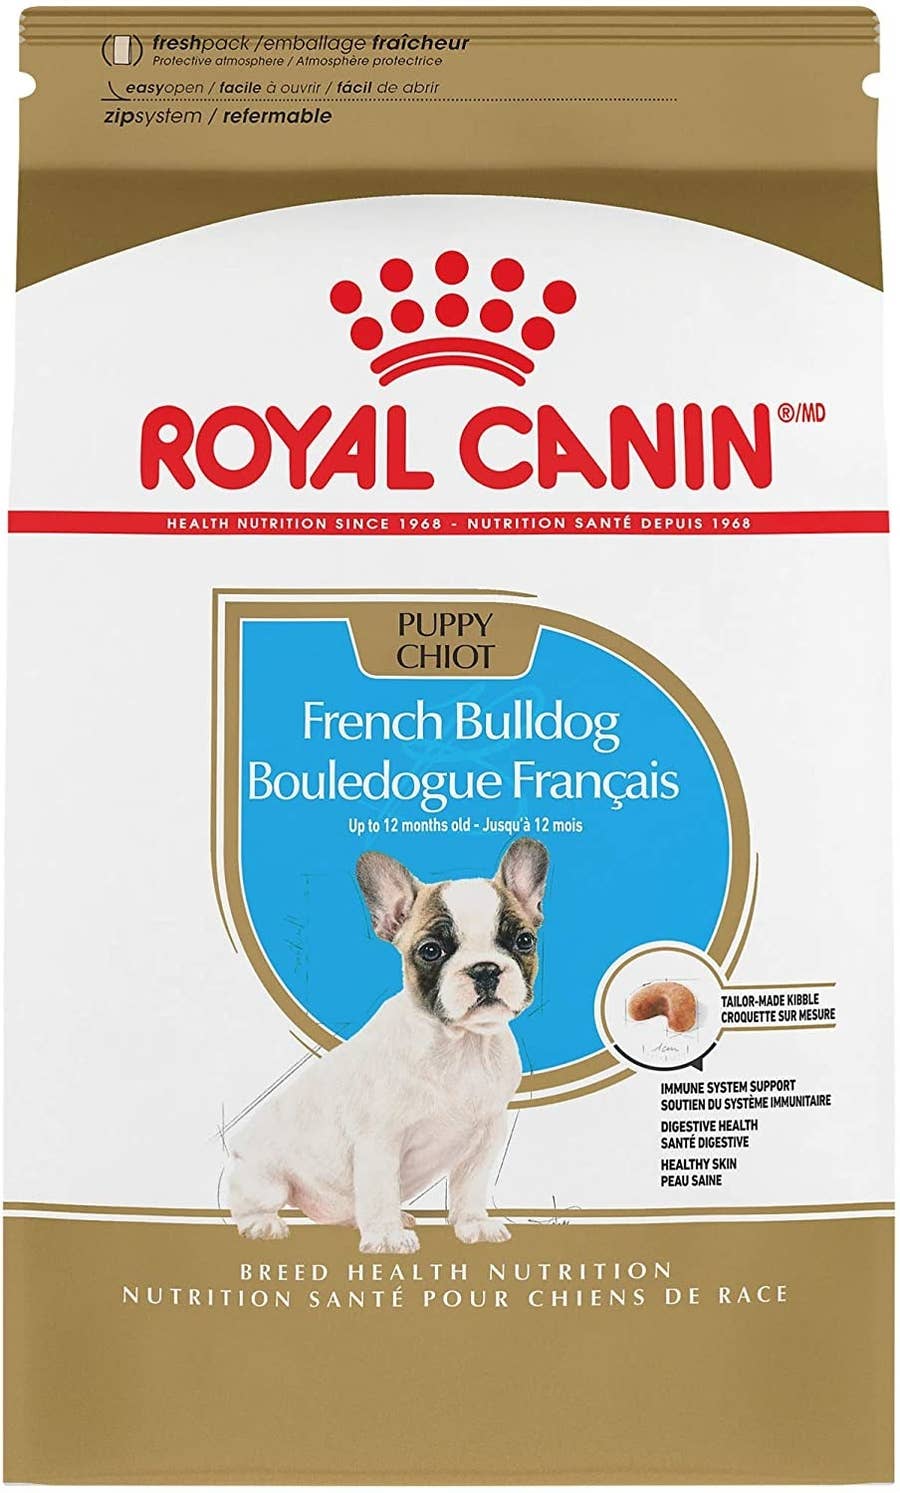 what supplies do I need for a french bulldog puppy? 2